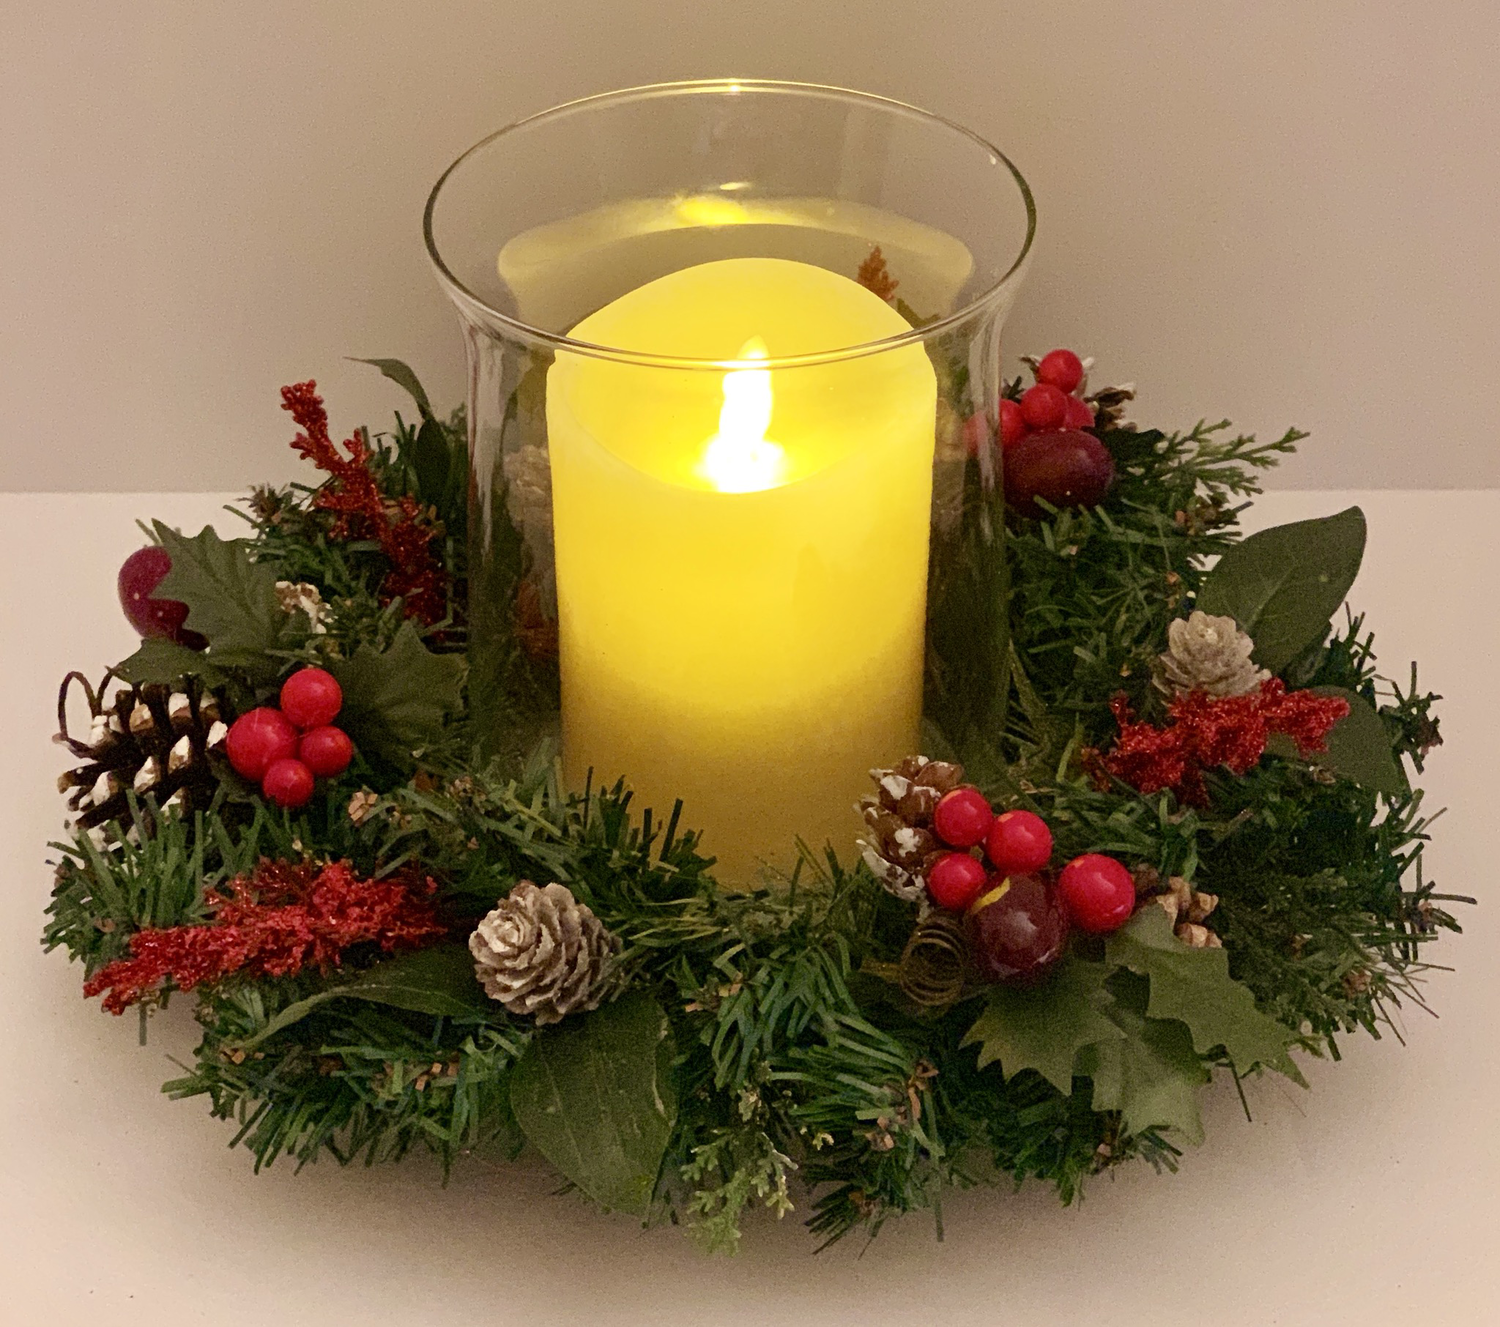 Evergreen Holiday Centerpiece Glass Hurricane Candle Table Decor Christmas Gift A Touch of Faith